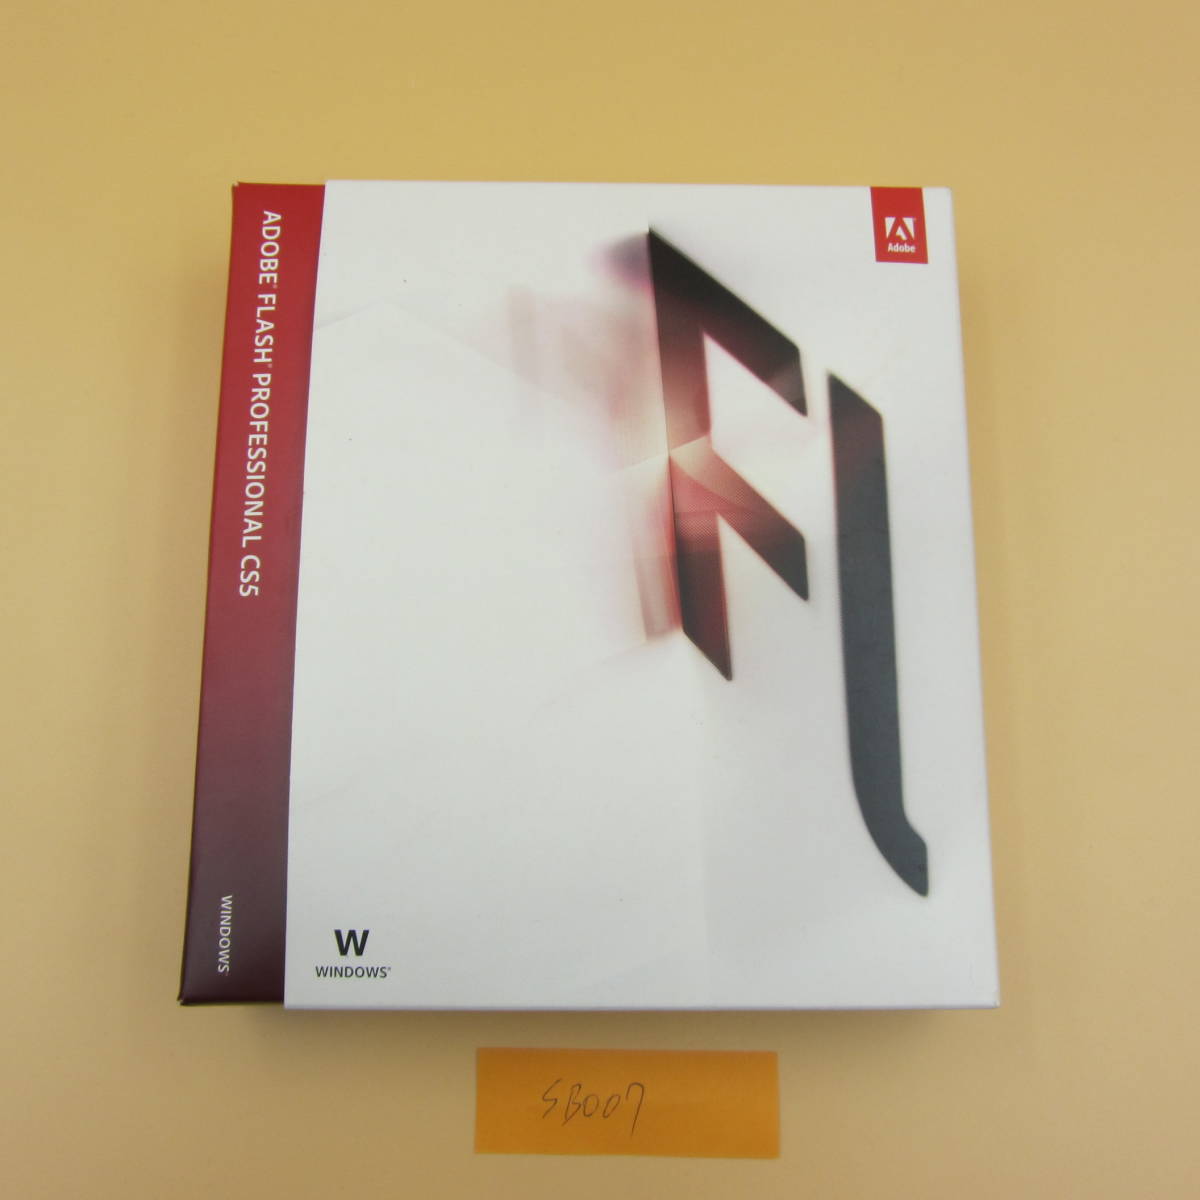 Download Adobe Flash CS6 for Free from Mediafire